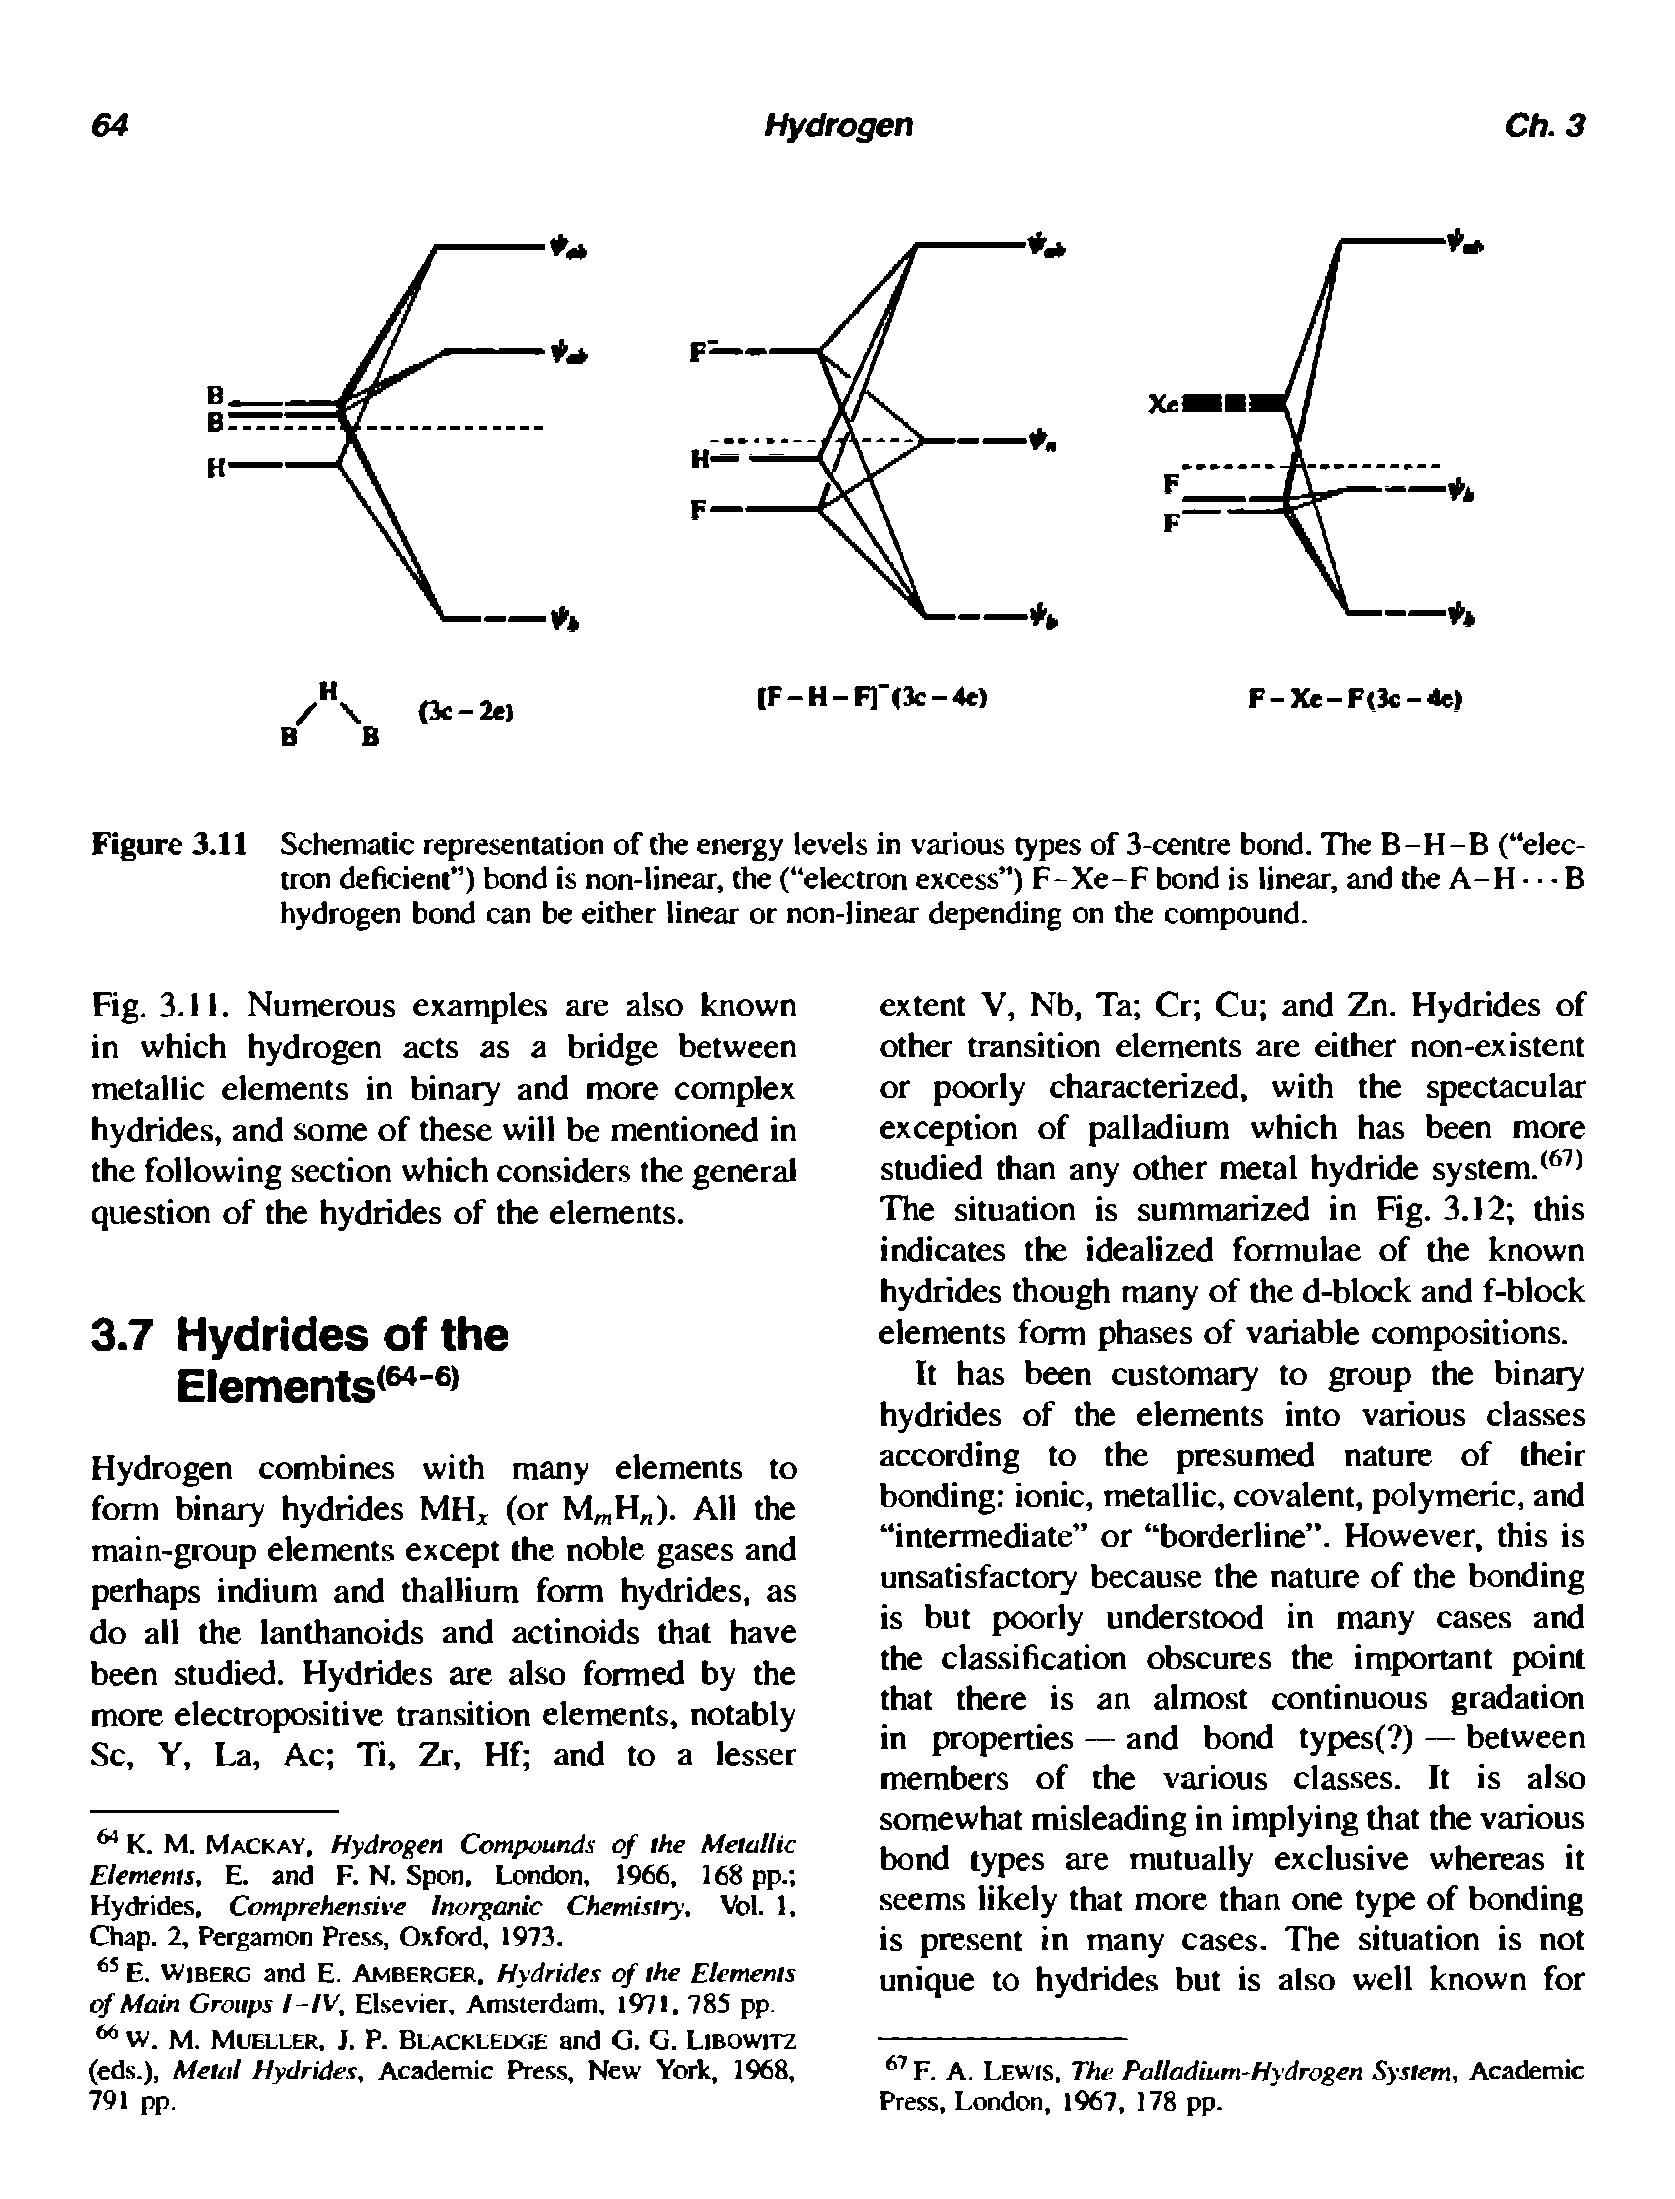 Fig. 3.11. Numerous examples are also known in which hydrogen acts as a bridge between metallic elements in binary and more complex hydrides, and some of these will be mentioned in the following section which considers the general question of the hydrides of the elements.